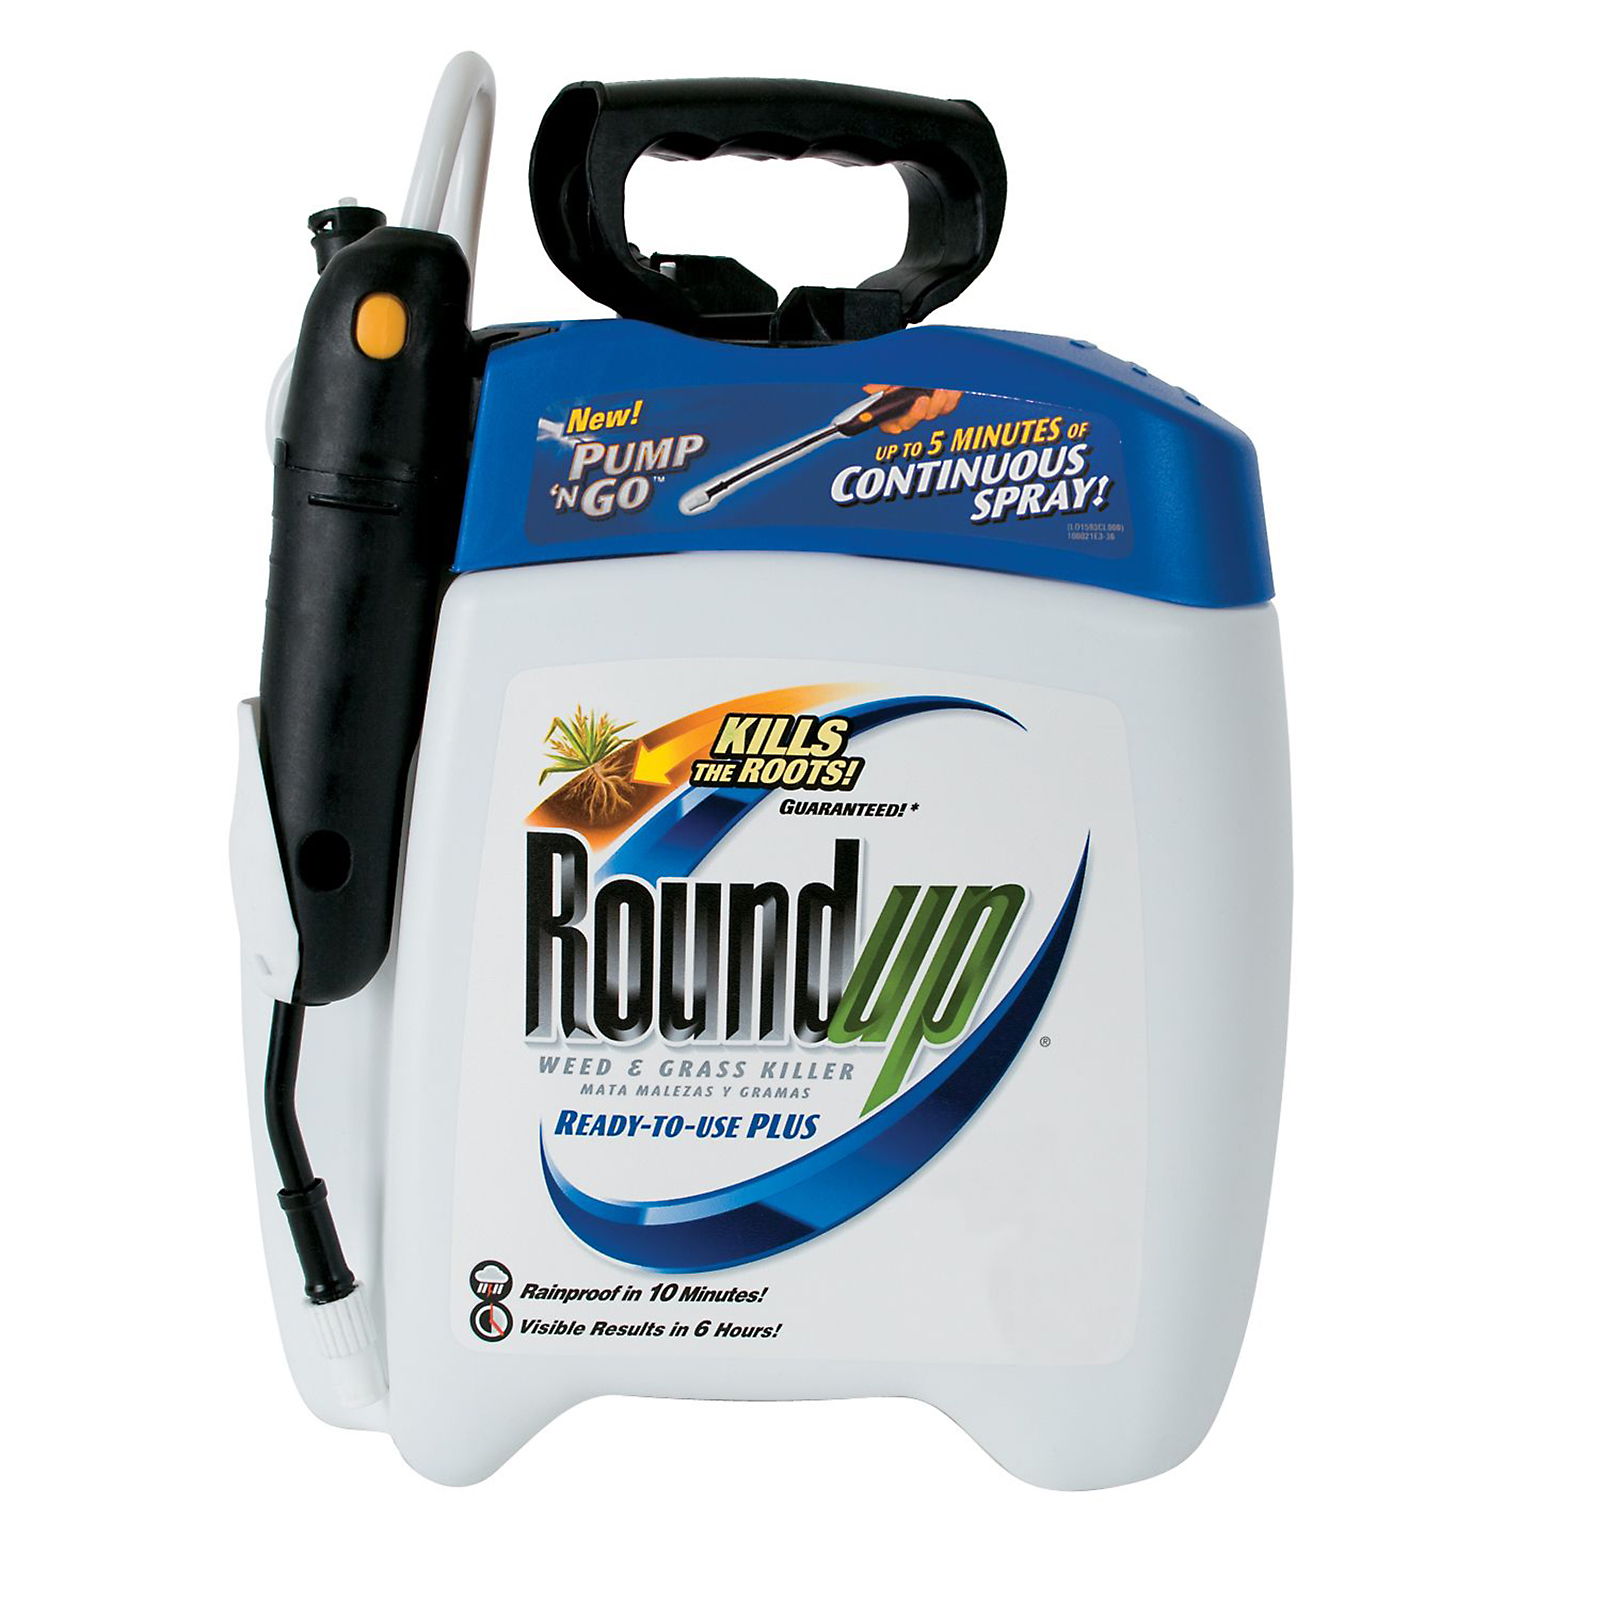 Roundup 5003810 Weed and Grass Killer Pump and Go Refill 1.25 Gallon